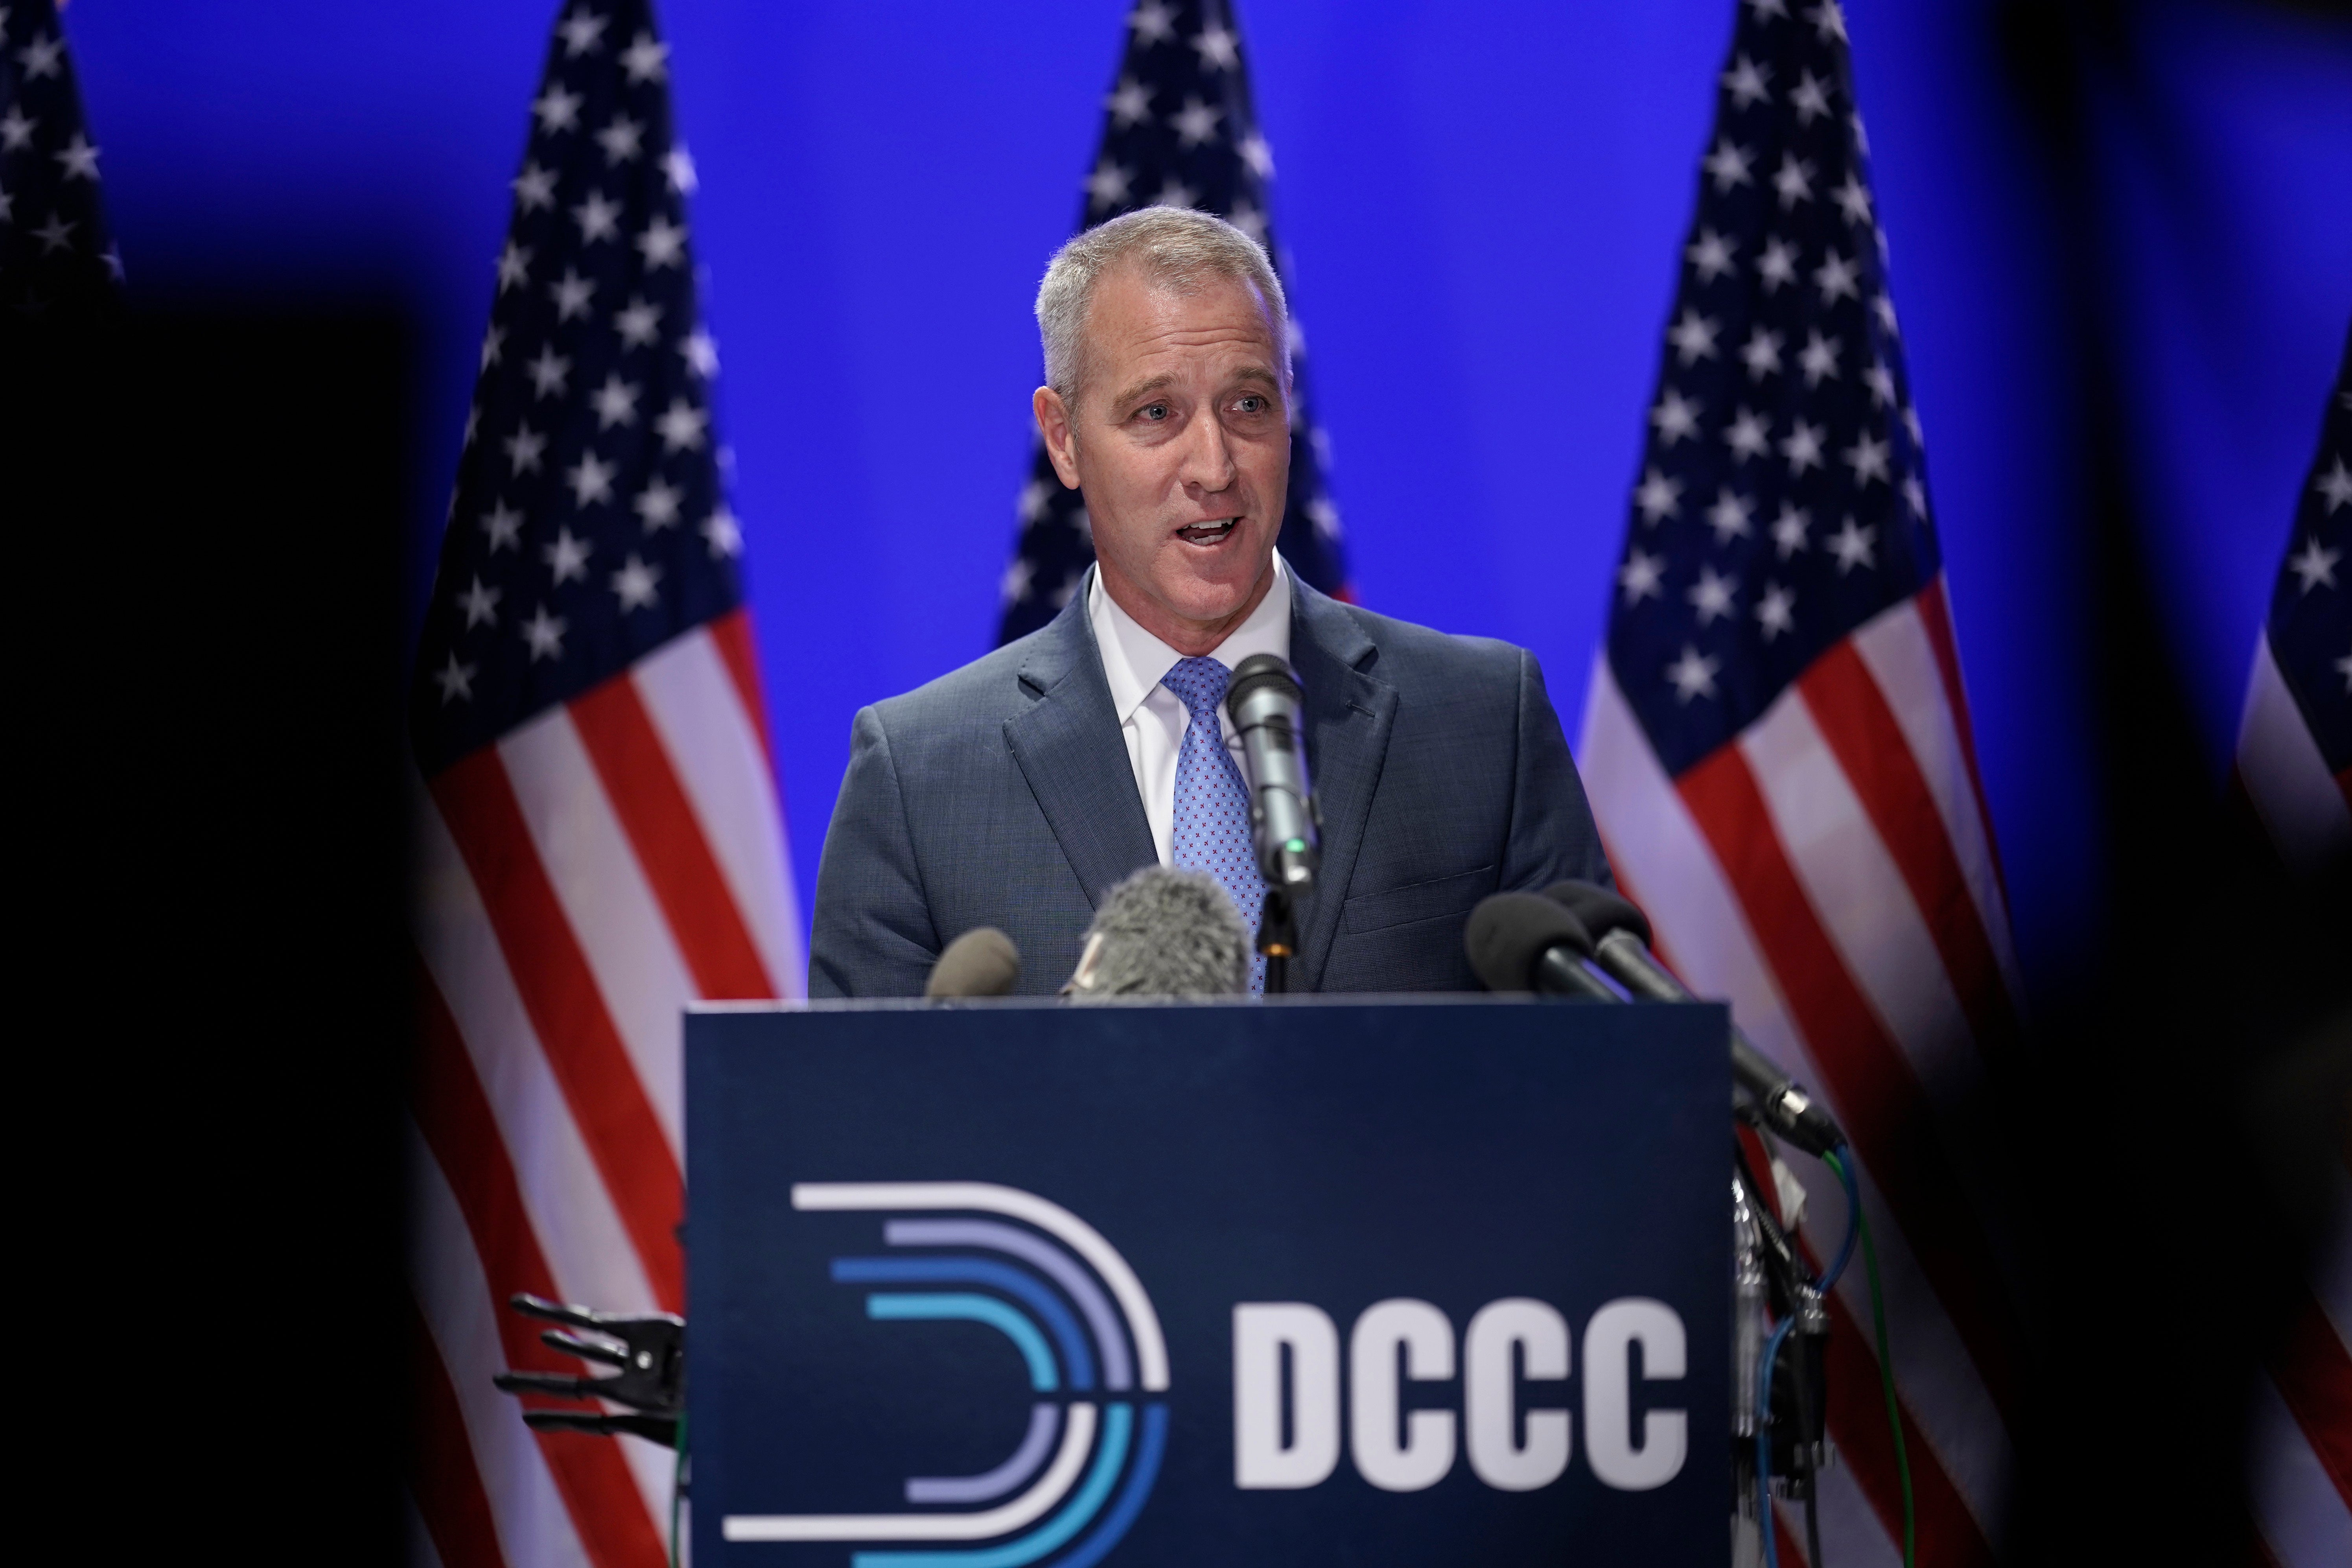 New York Congressman and party chair Sean Patrick Maloney lost a race to Republican Mike Lawler.